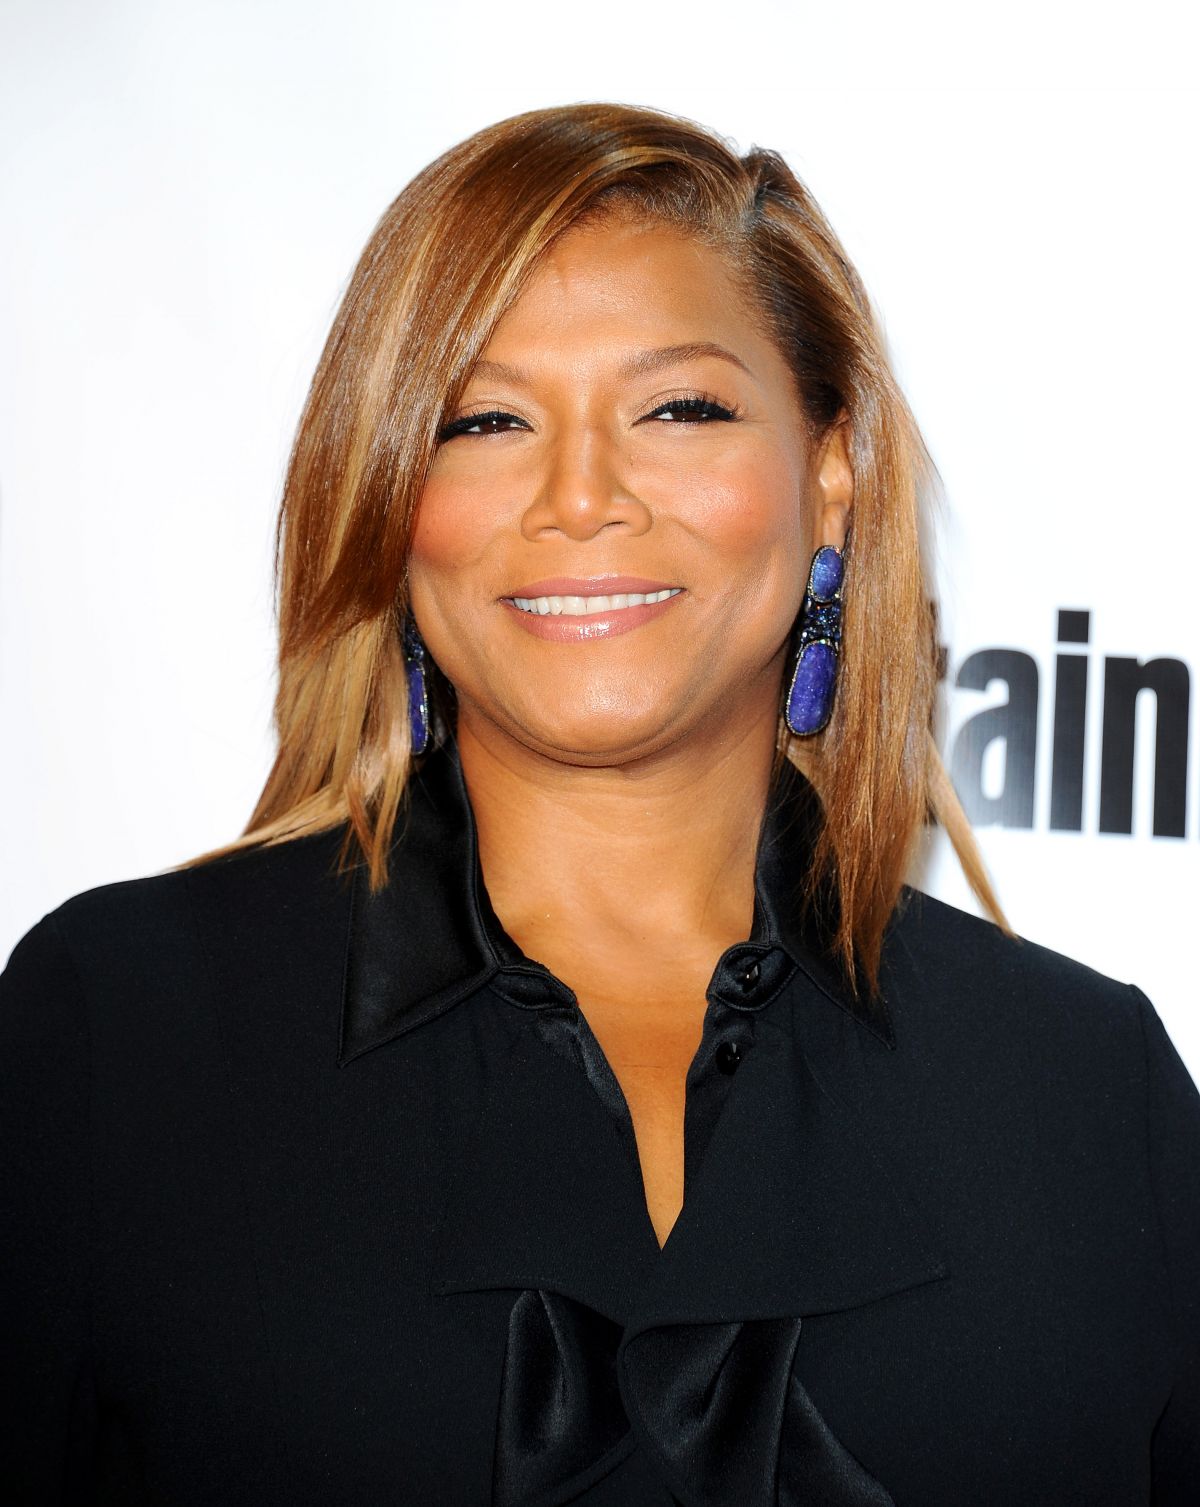 QUEEN LATIFAH at VH1 Big in 2015 With Entertainment Weekly Awards in ...